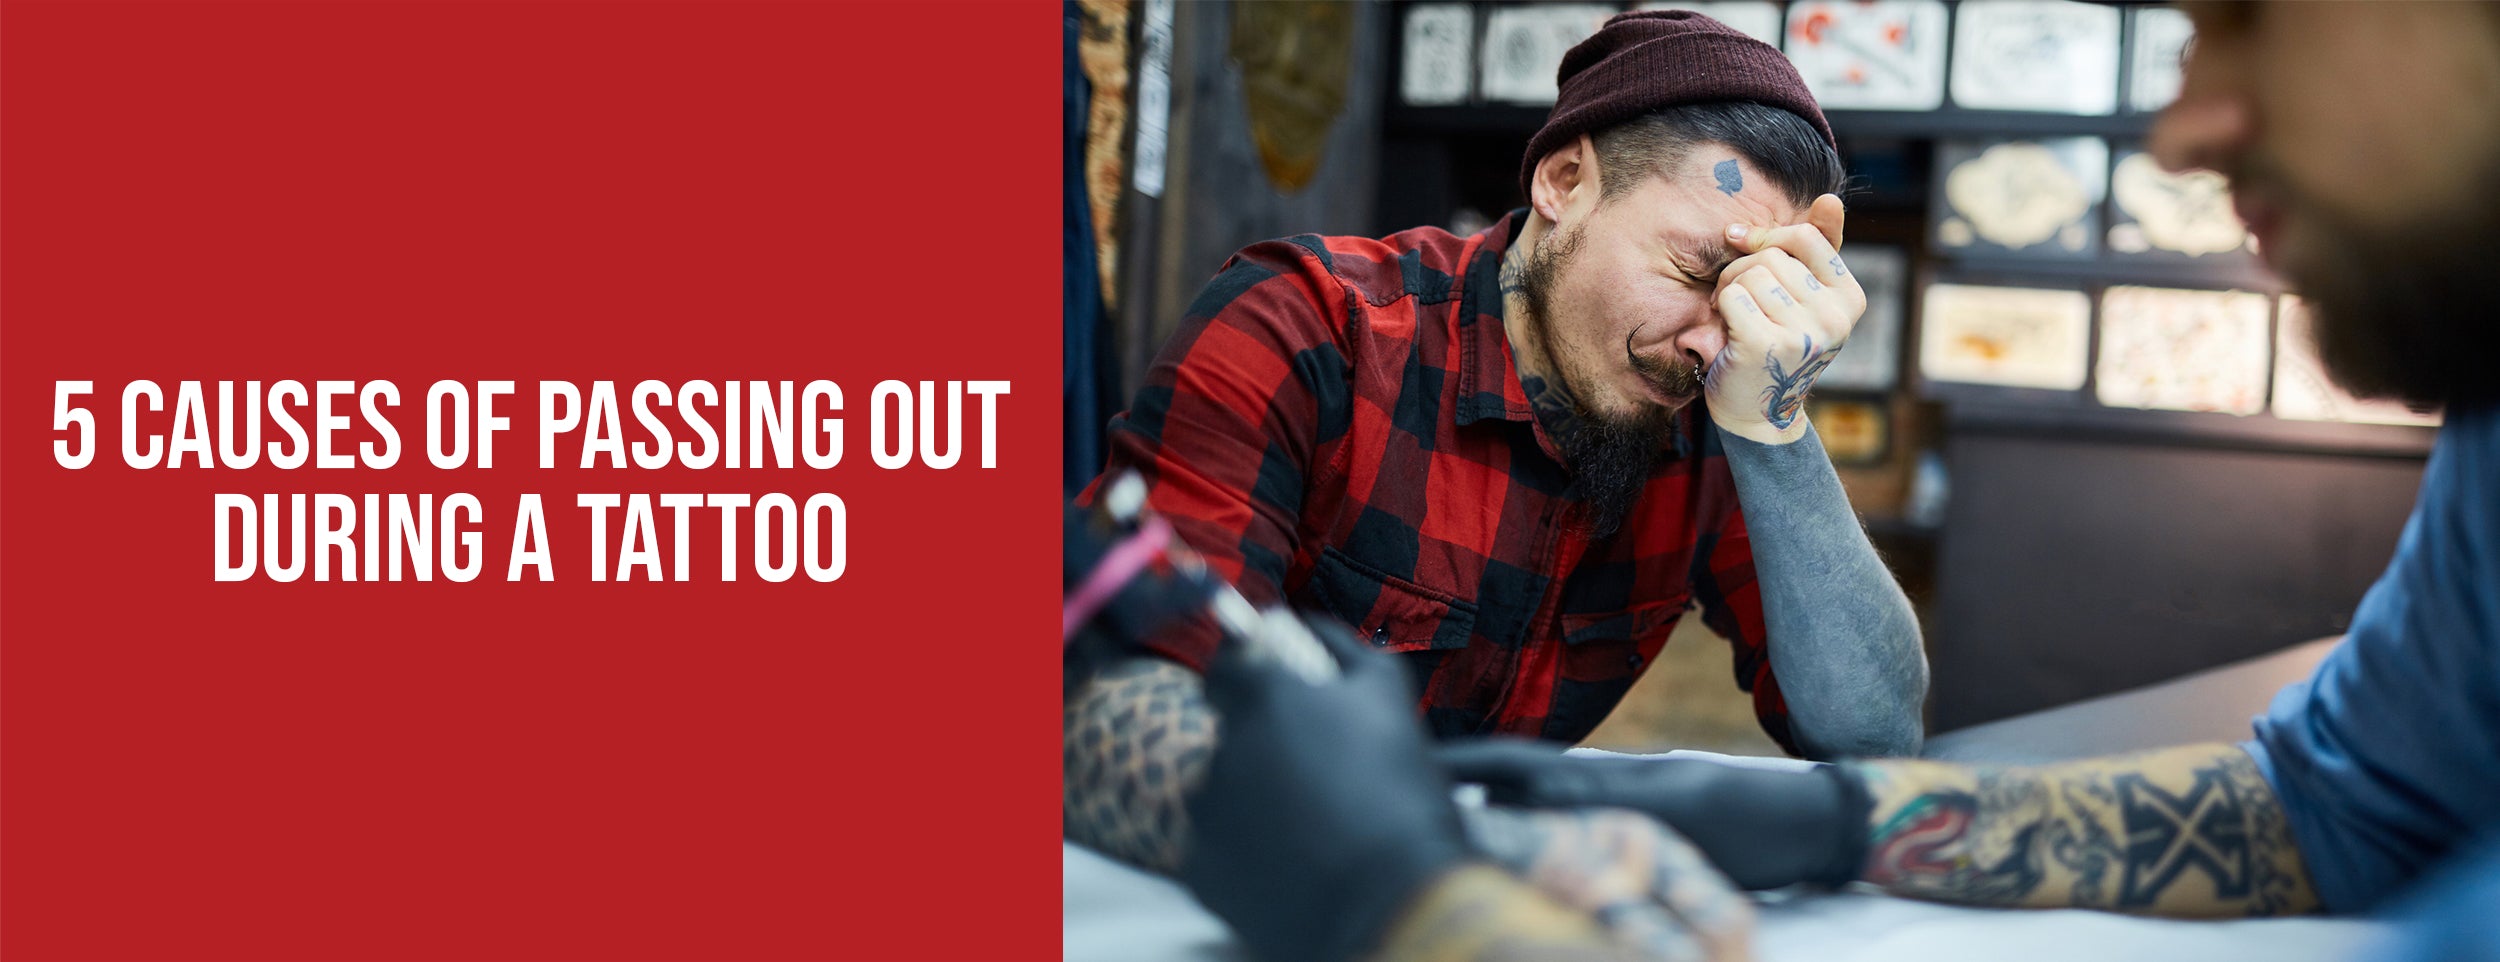 The 5 most common reasons for passing out during a tattoo